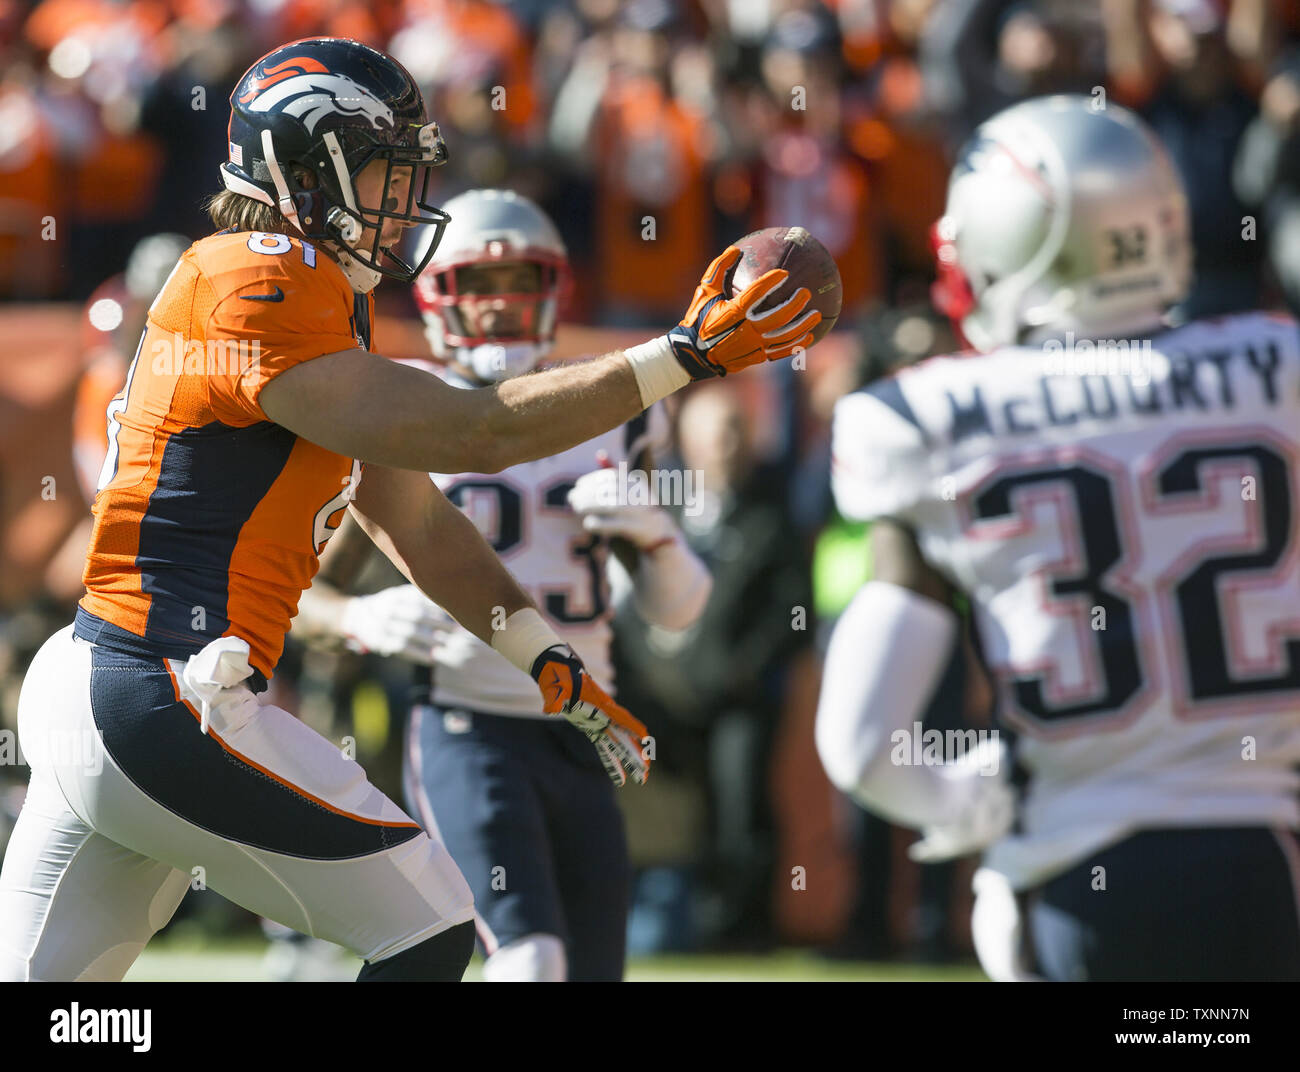 Denver Broncos tight end Owen Daniels crosses the goal line on a 21-yard touchdown against the New England Patriots safeties Patrick Chung 923) and Devin McCourty in the first quarter during the AFC Championship game at Sport Authority Field at Mile High in Denver on January 24, 2016.    Photo by Gary C. Caskey/UPI Stock Photo